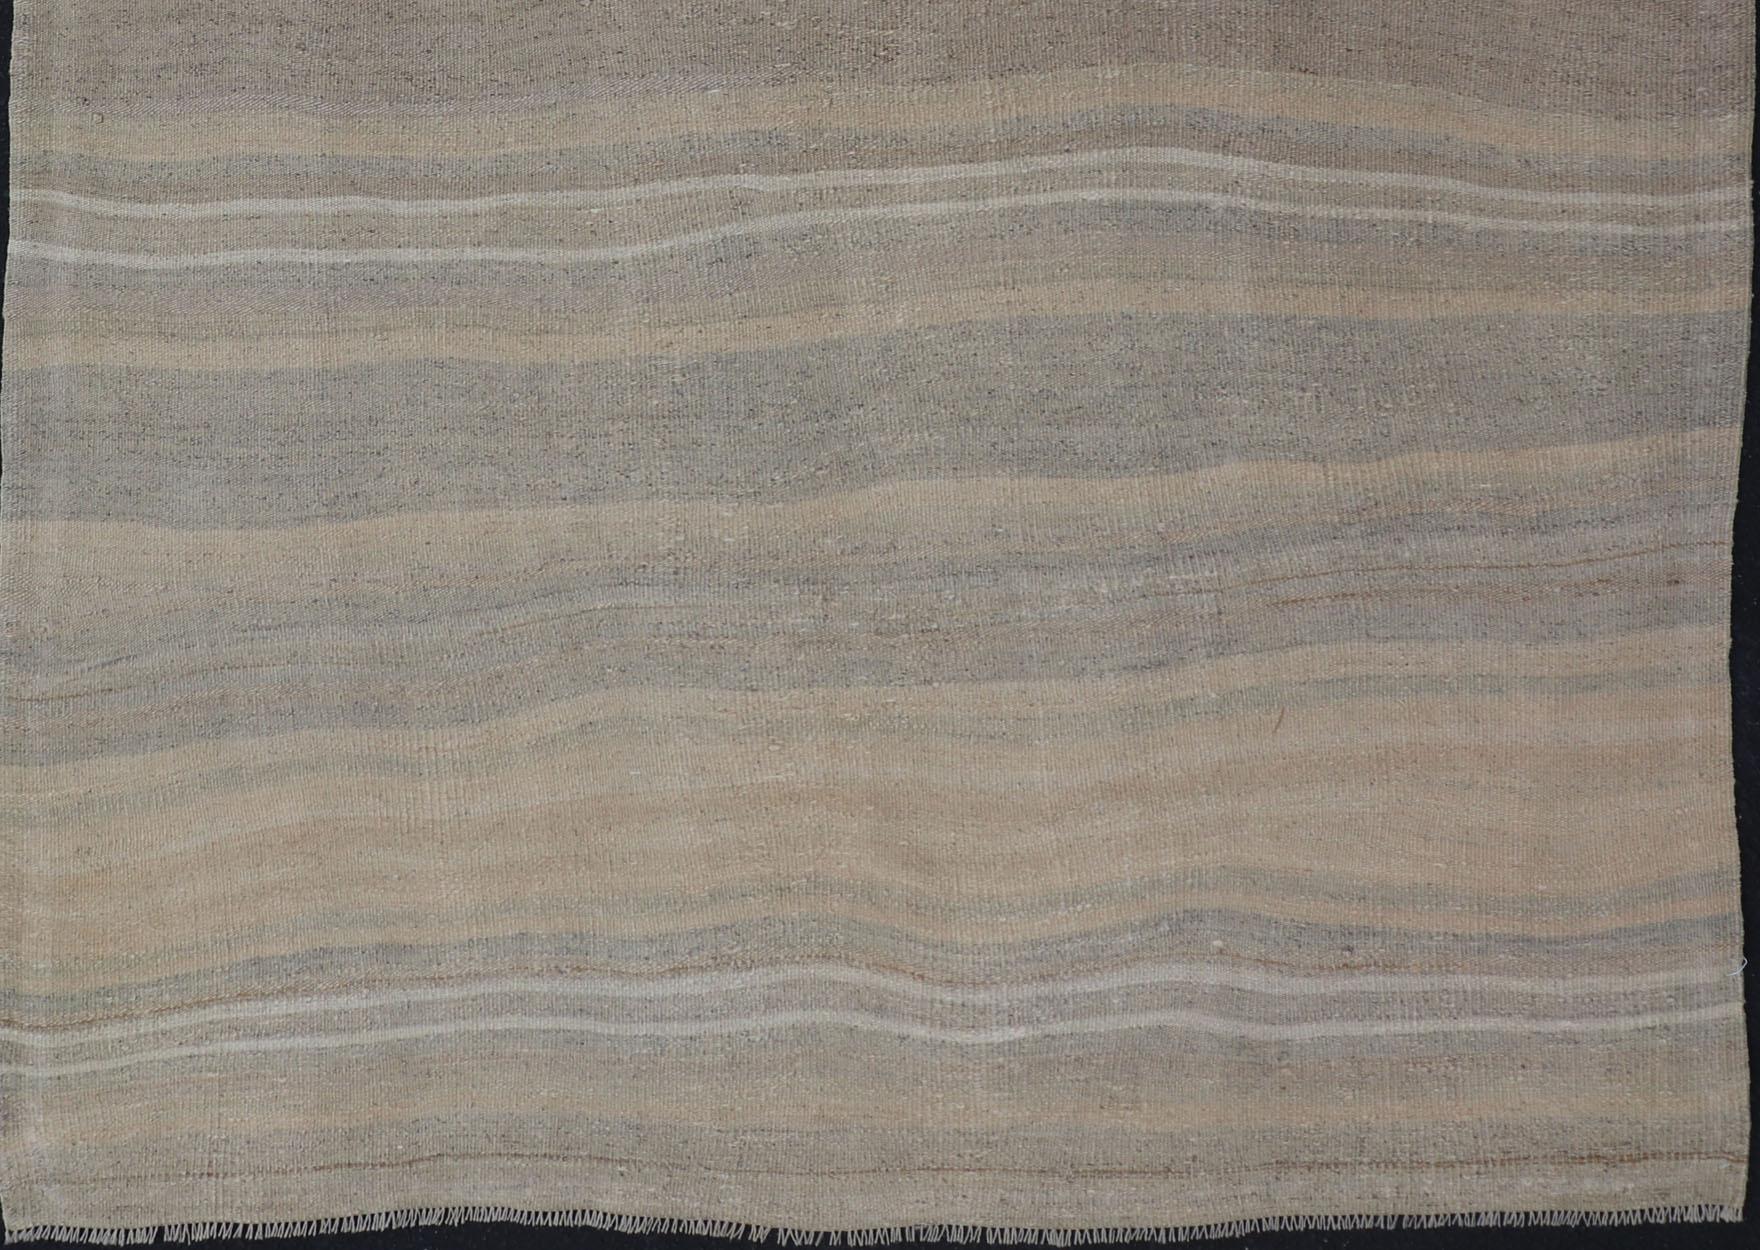 Vintage Turkish Kilim with Stripes in Gray, Tan, Taupe, and Cream For Sale 4